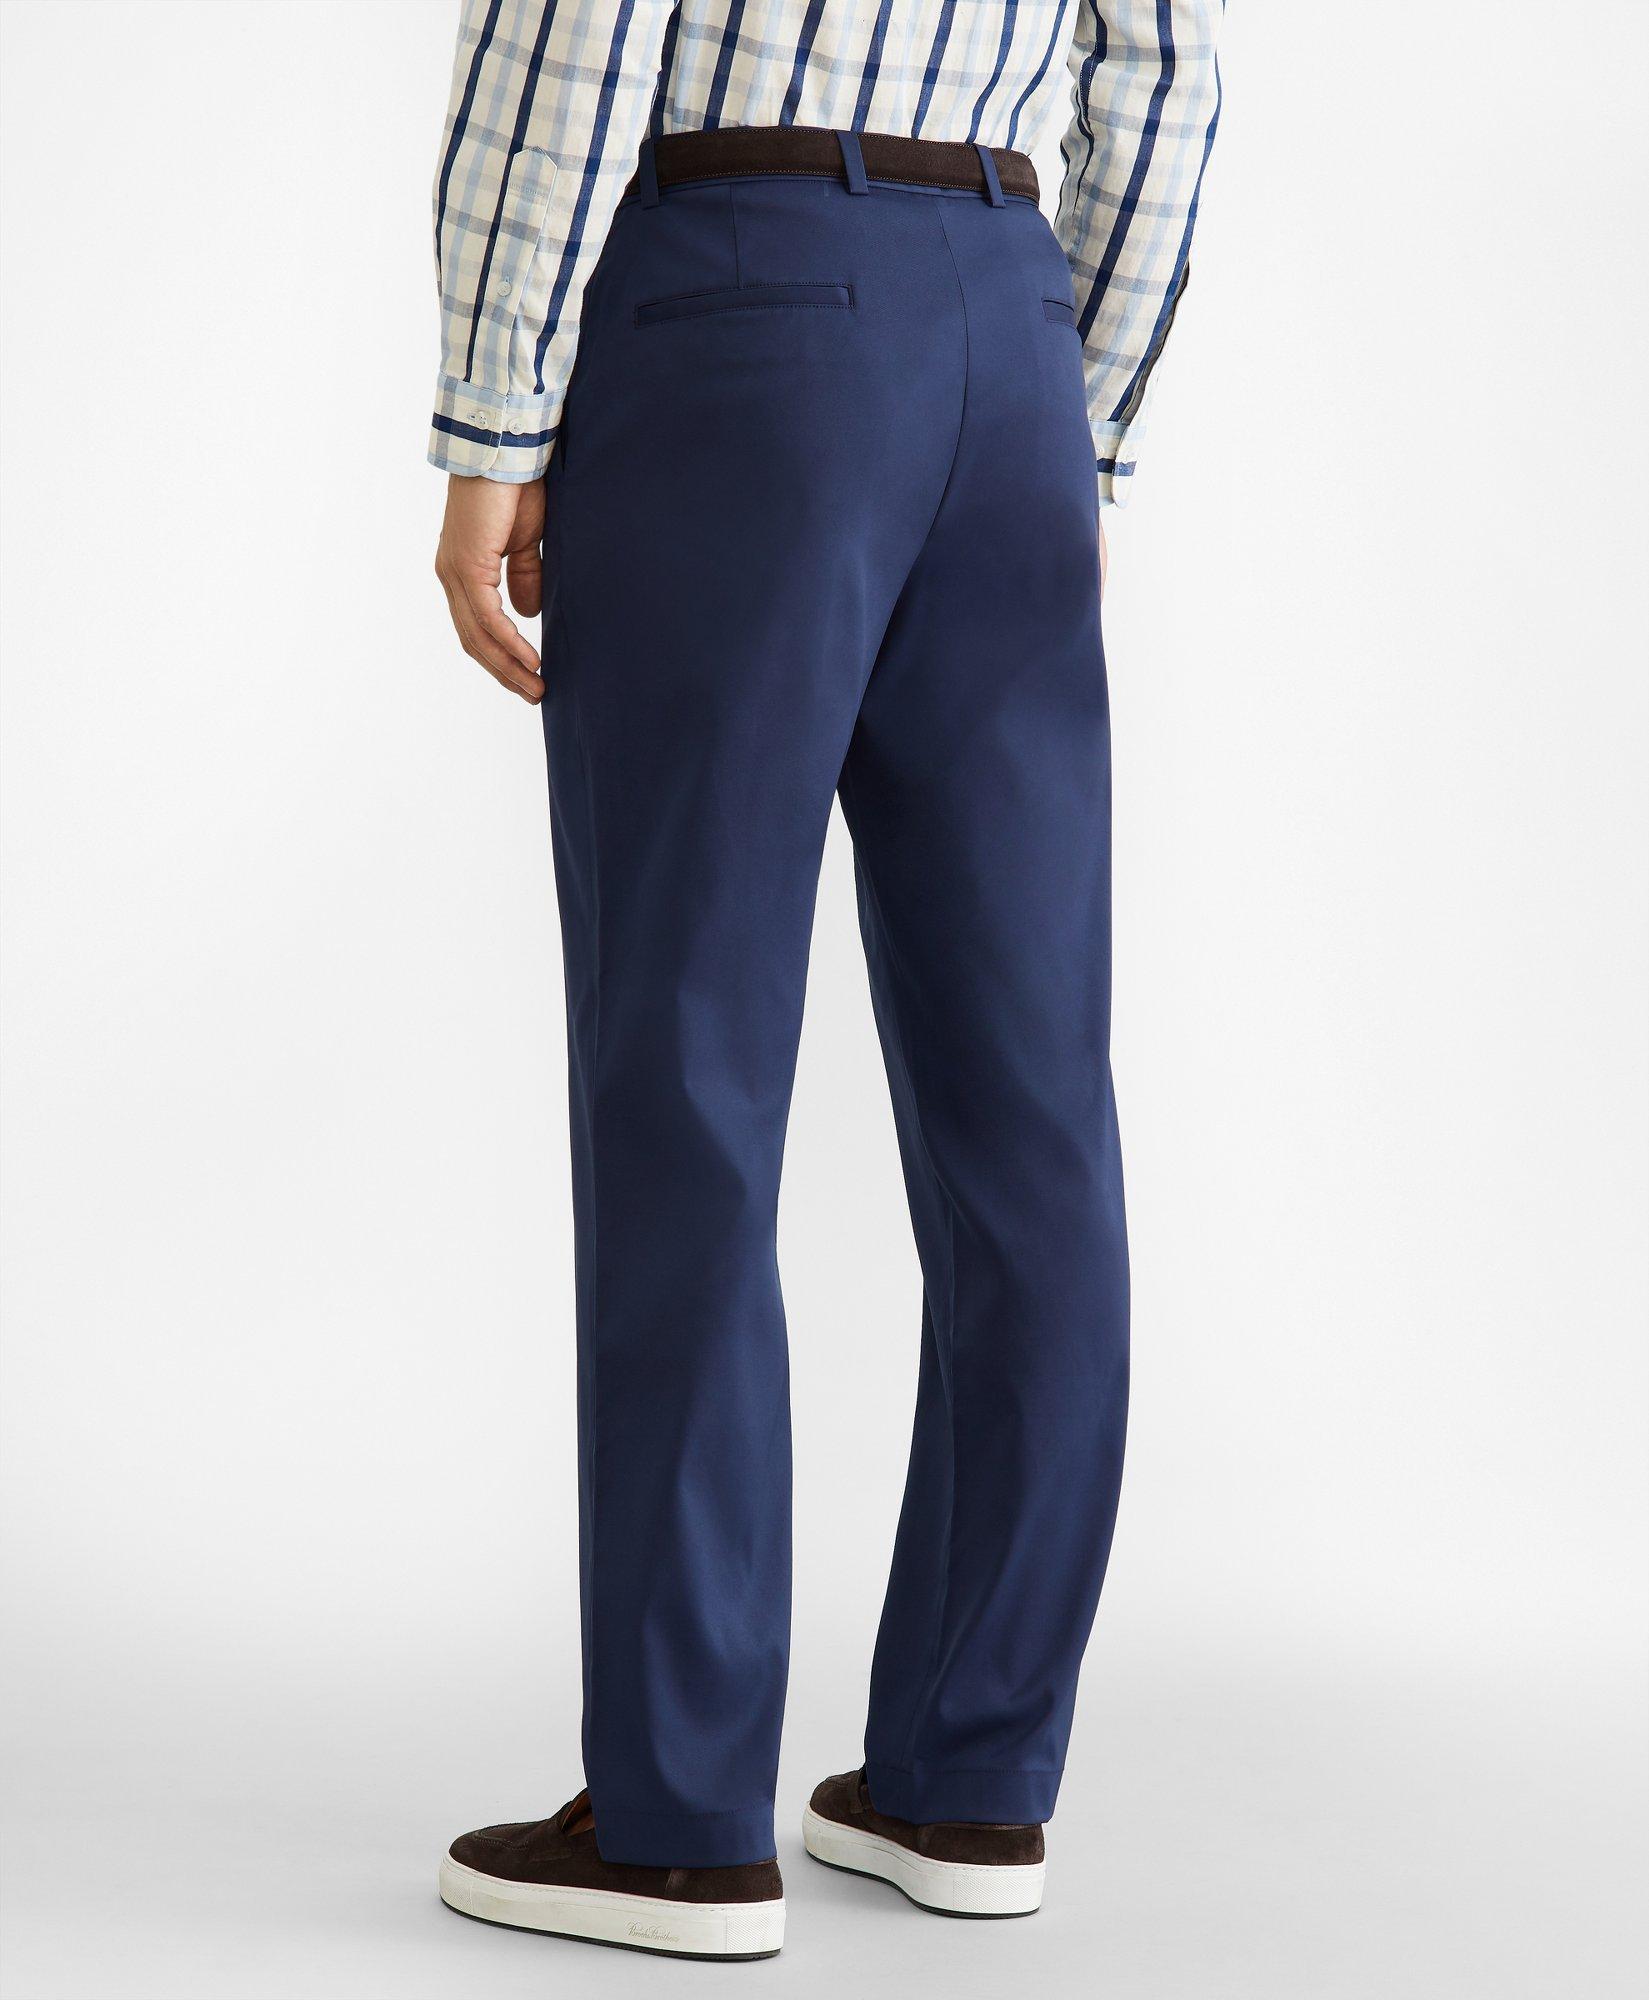 Clark Fit Brooks Brothers Stretch Performance Chino Pants